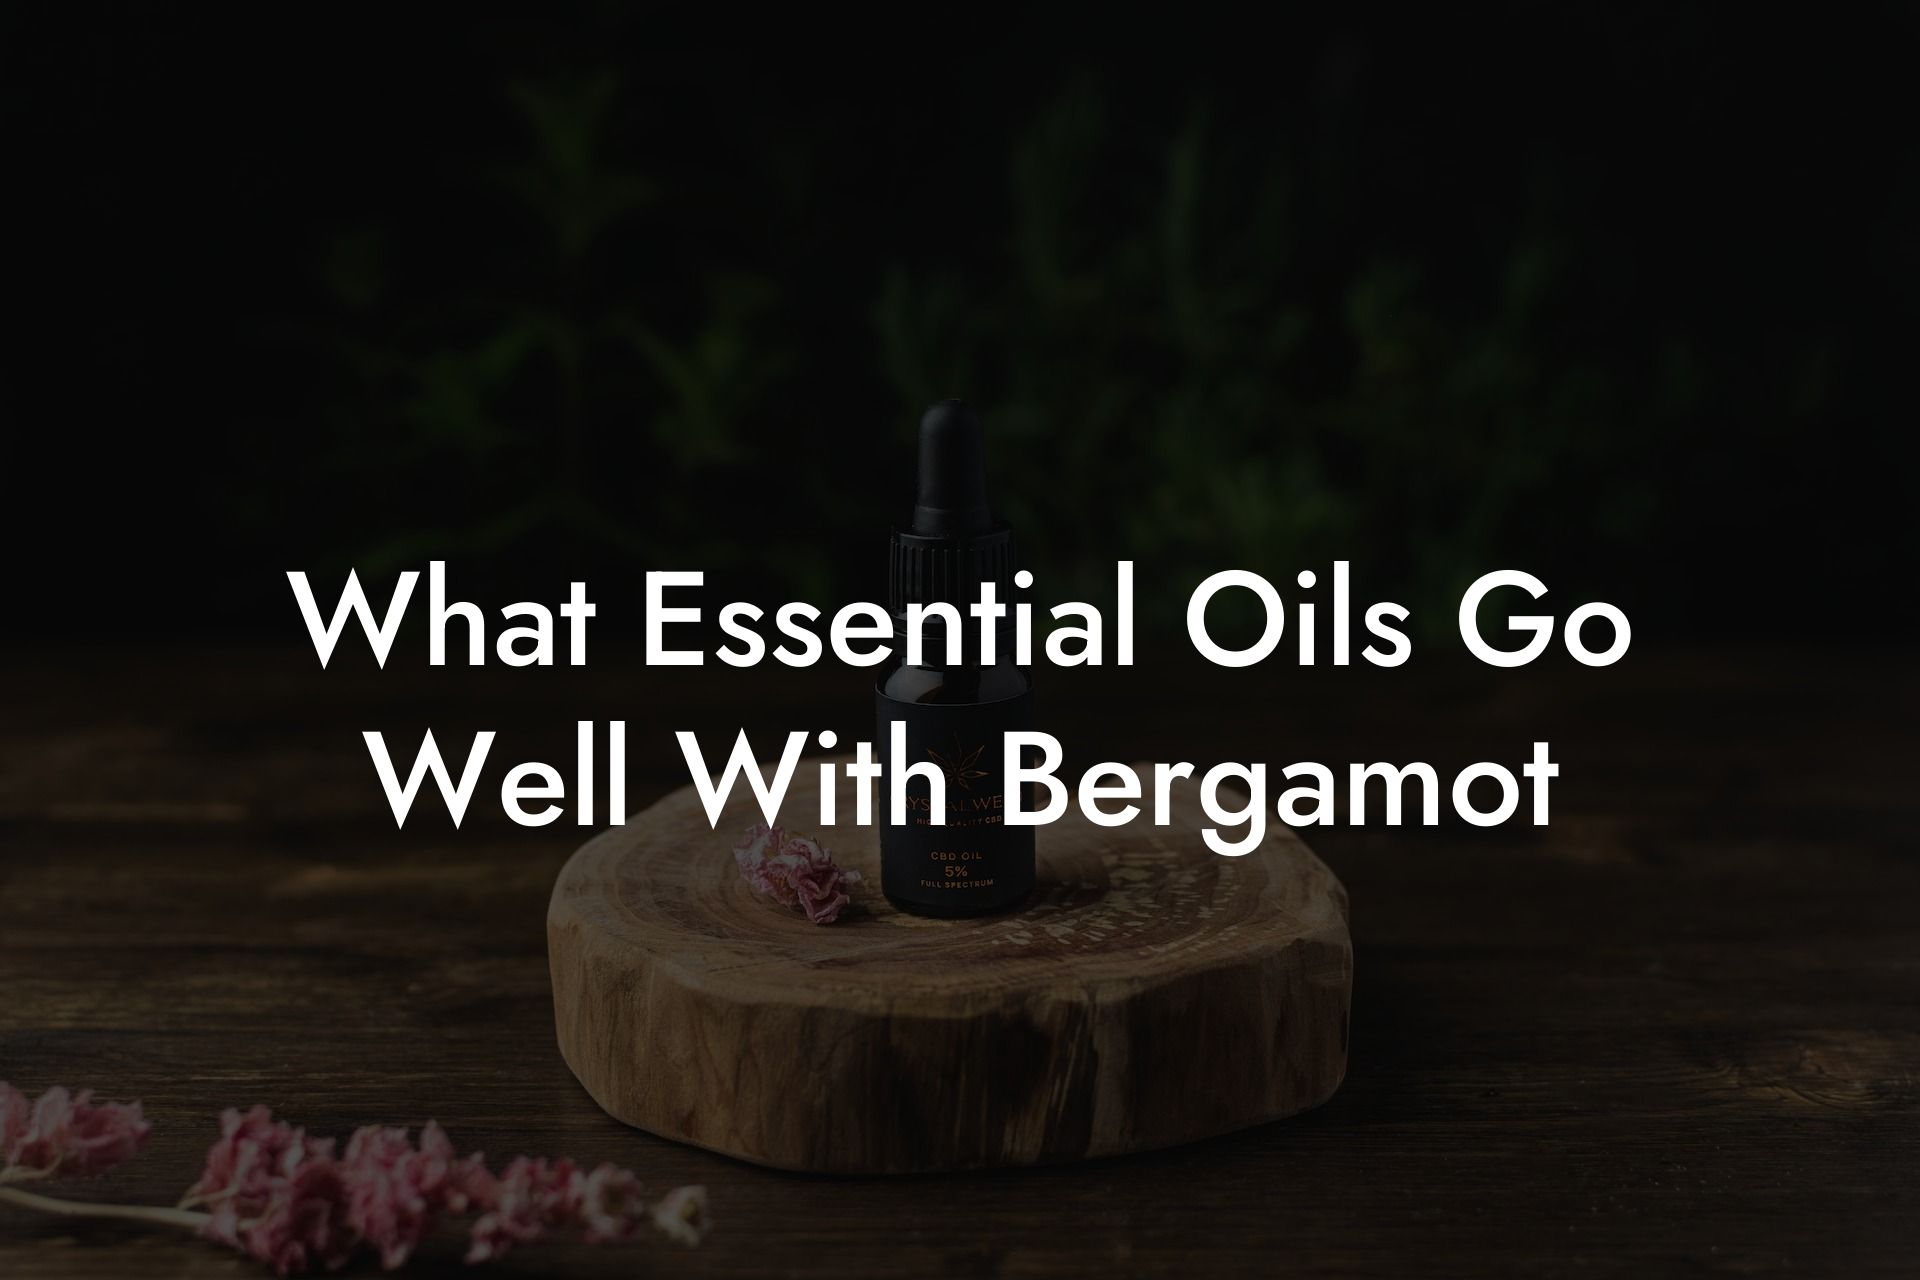 What Essential Oils Go Well With Bergamot